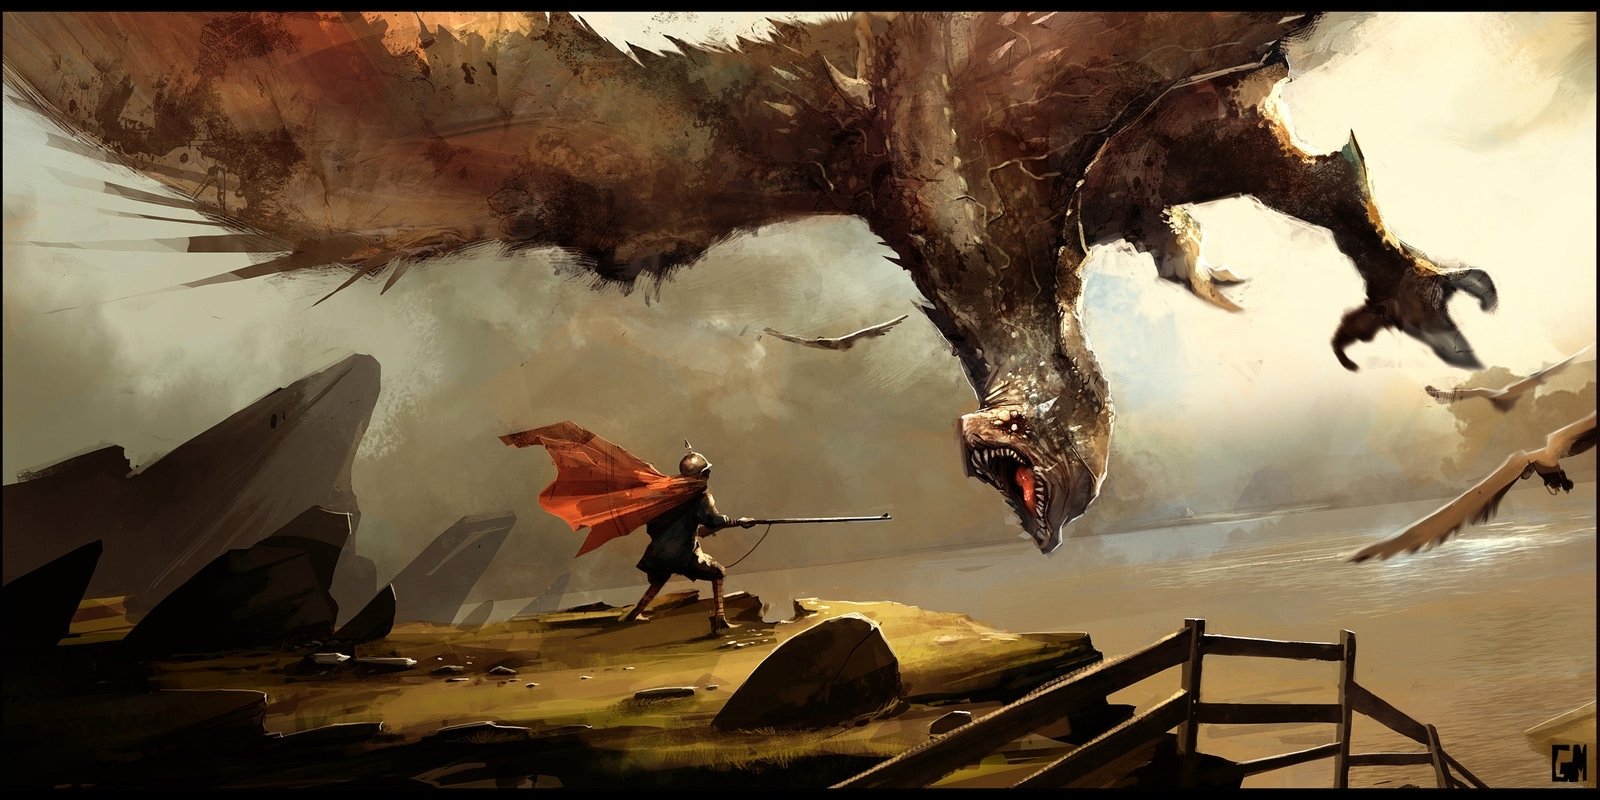 Dragon Scary Wallpapers